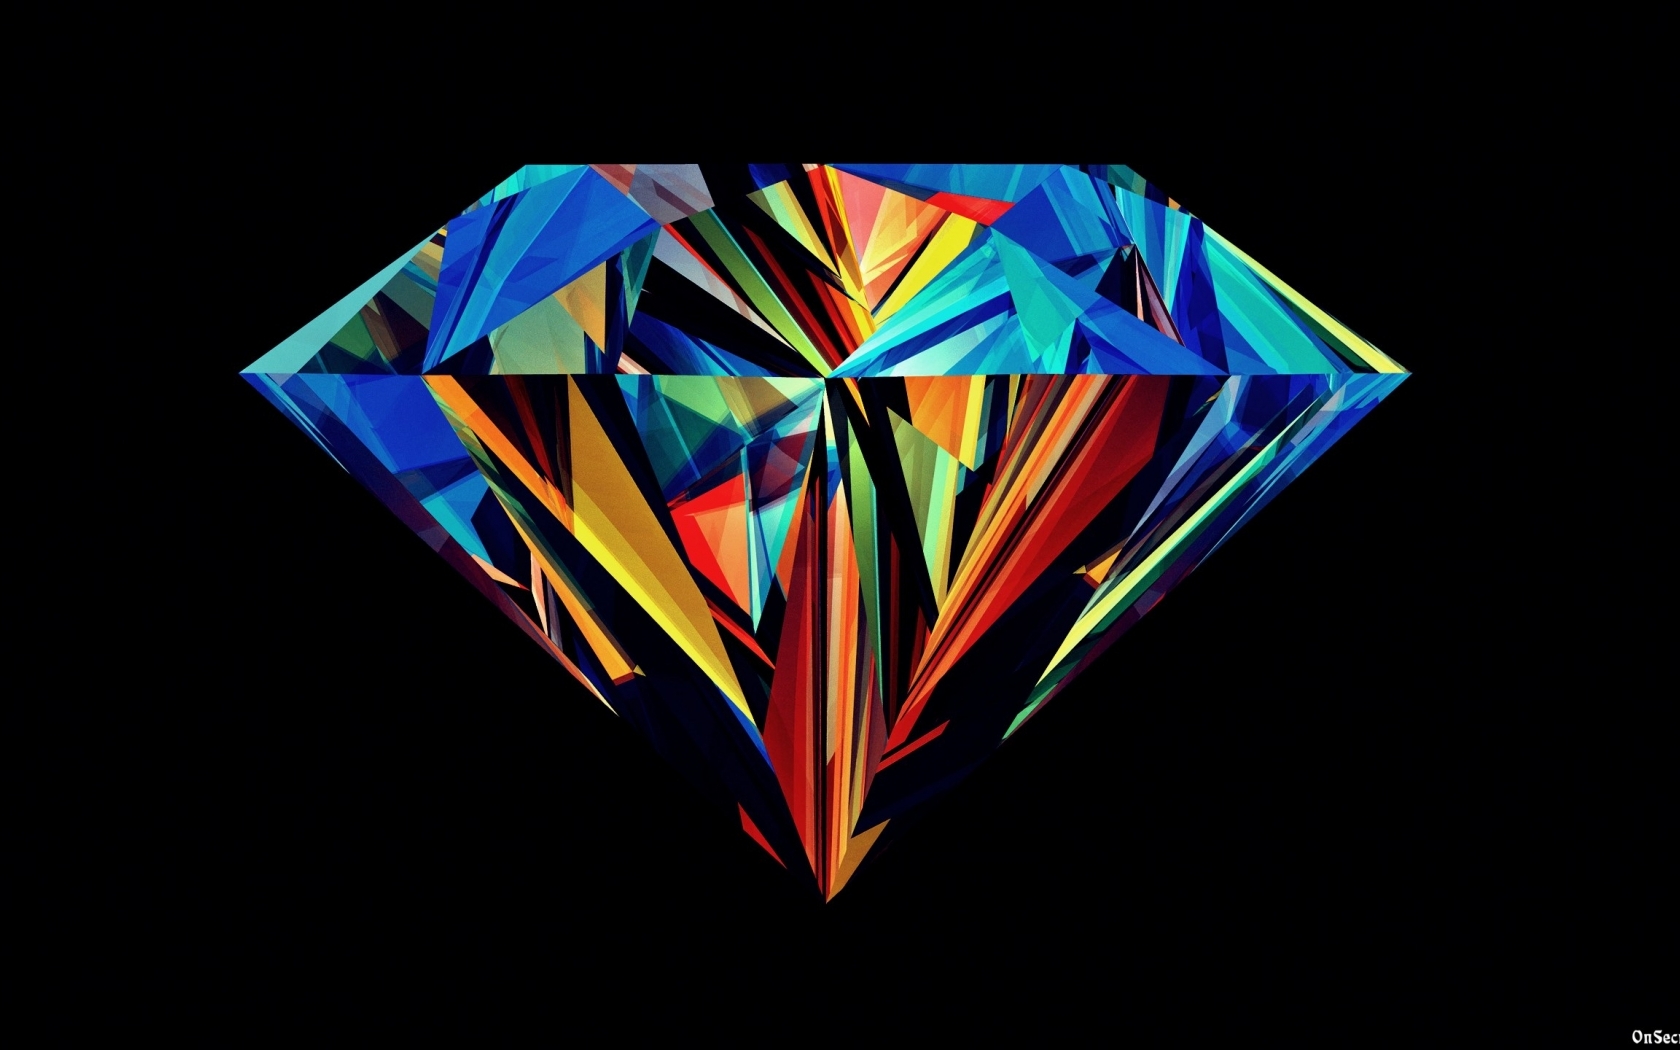 1600x900 / 1600x900 diamond background - Coolwallpapers.me!